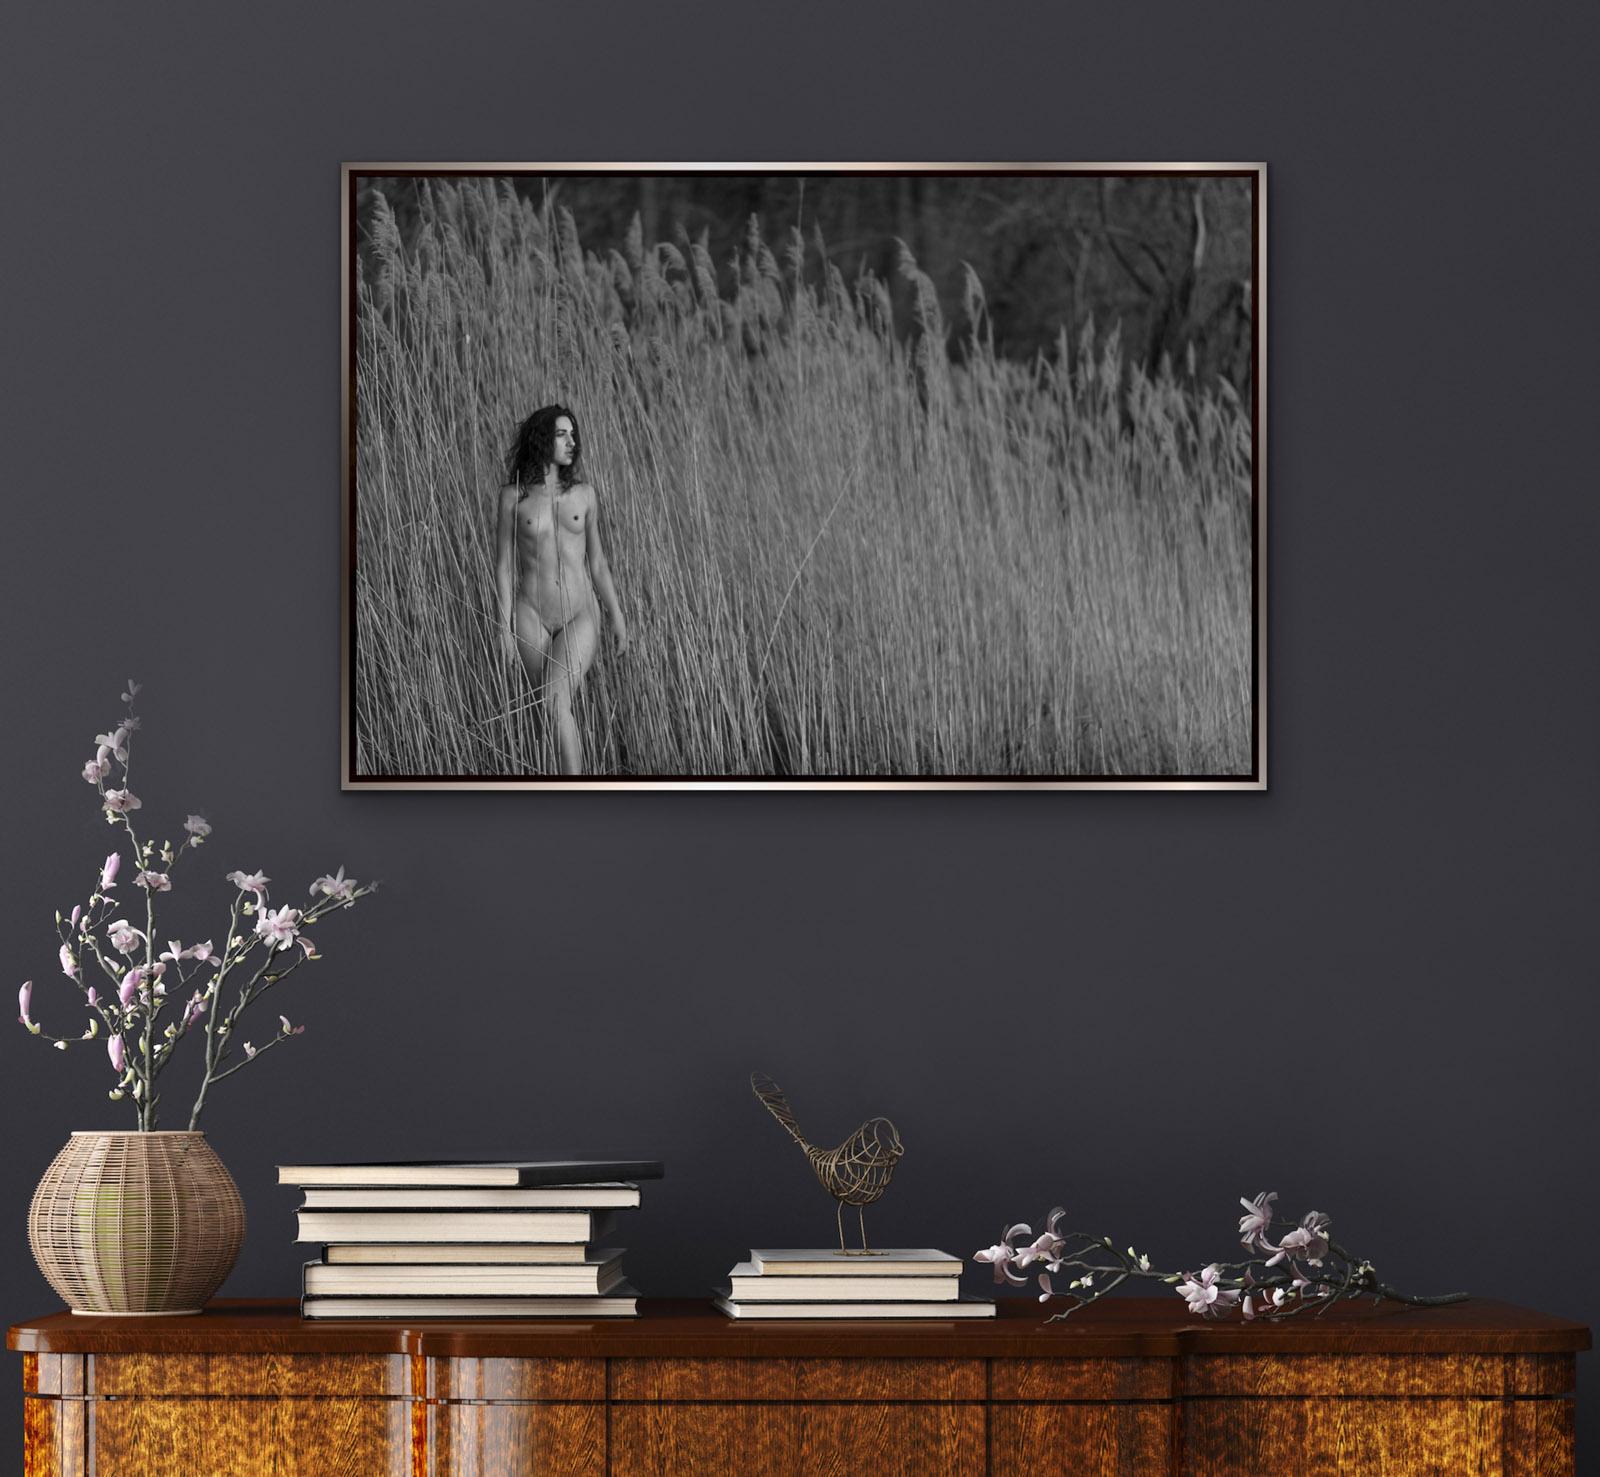 Woman in Reeds - Contemporary Photograph by John Mazlish